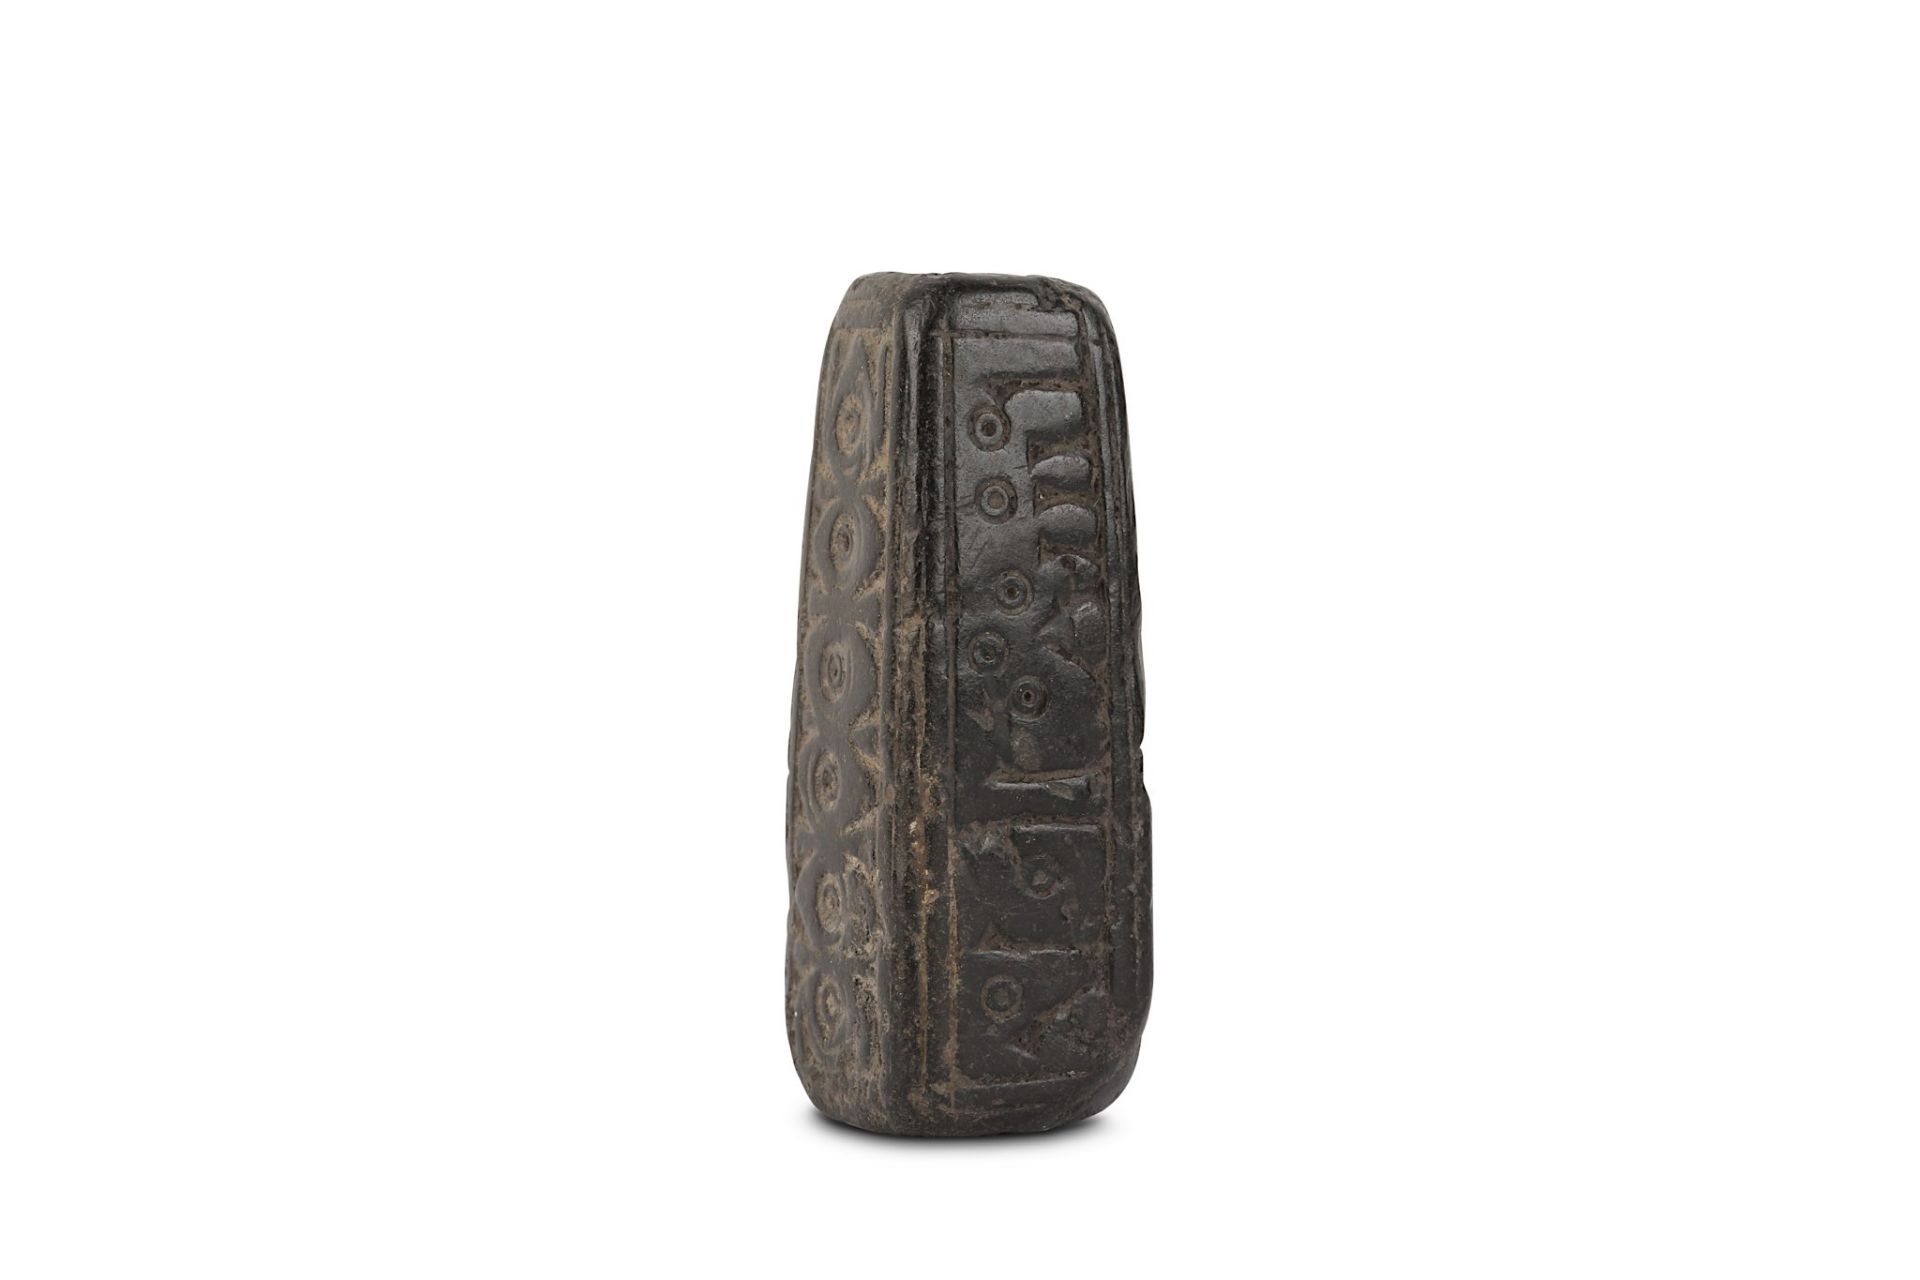 A GHAZNAVID GREY SCHIST KOHL FLASK  Afghanistan, possibly 11th - 12th century or later Of slightly